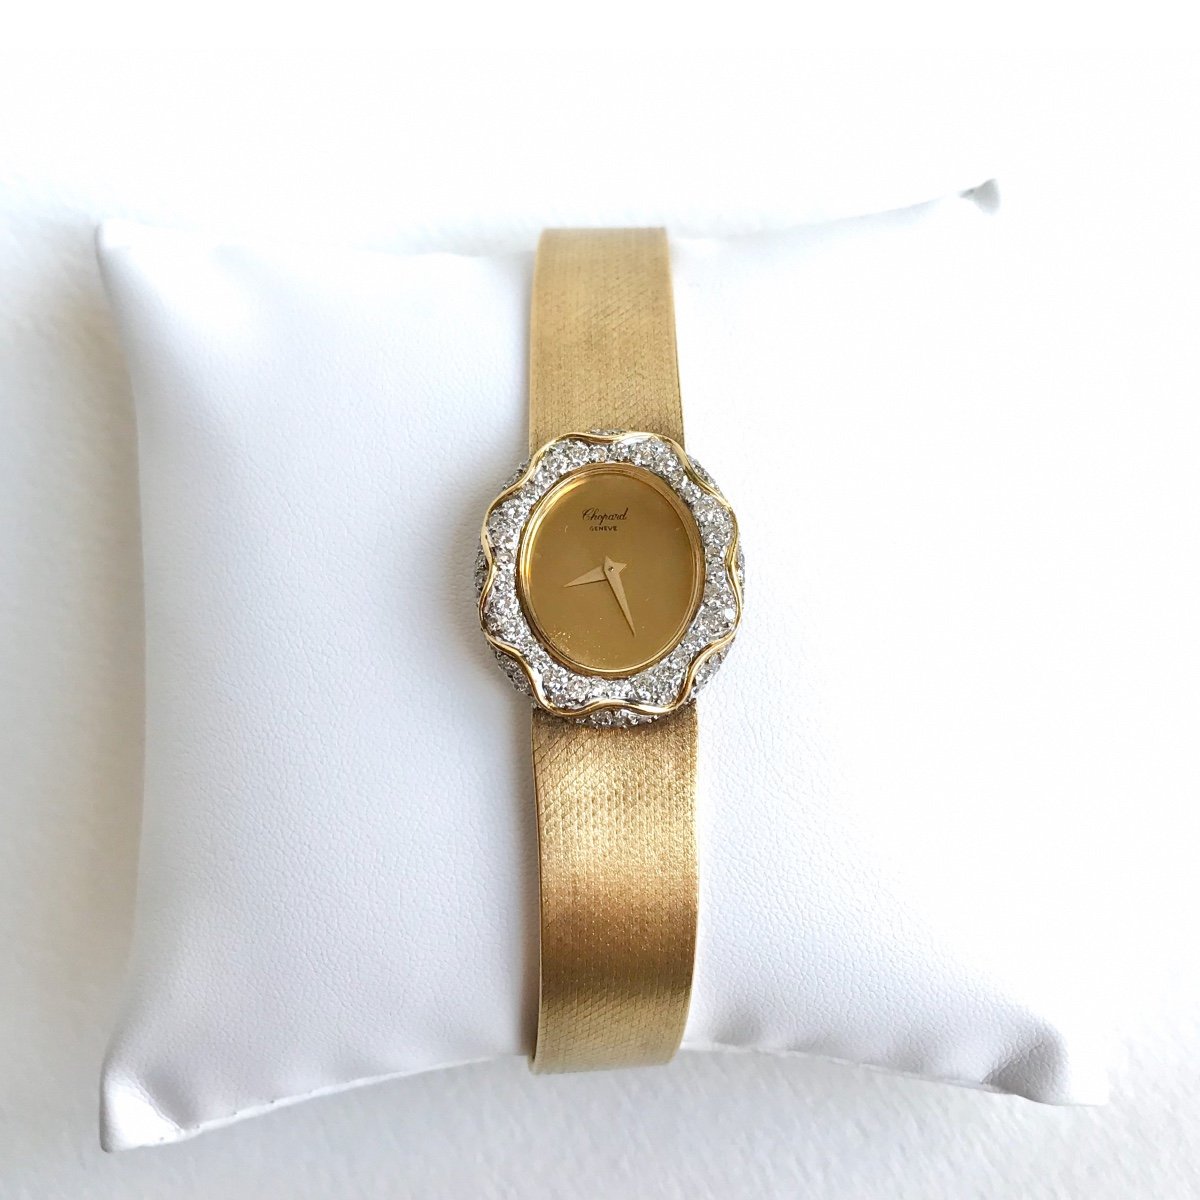 Chopard 1960 Watch In 18k Yellow Gold And Diamonds-photo-4